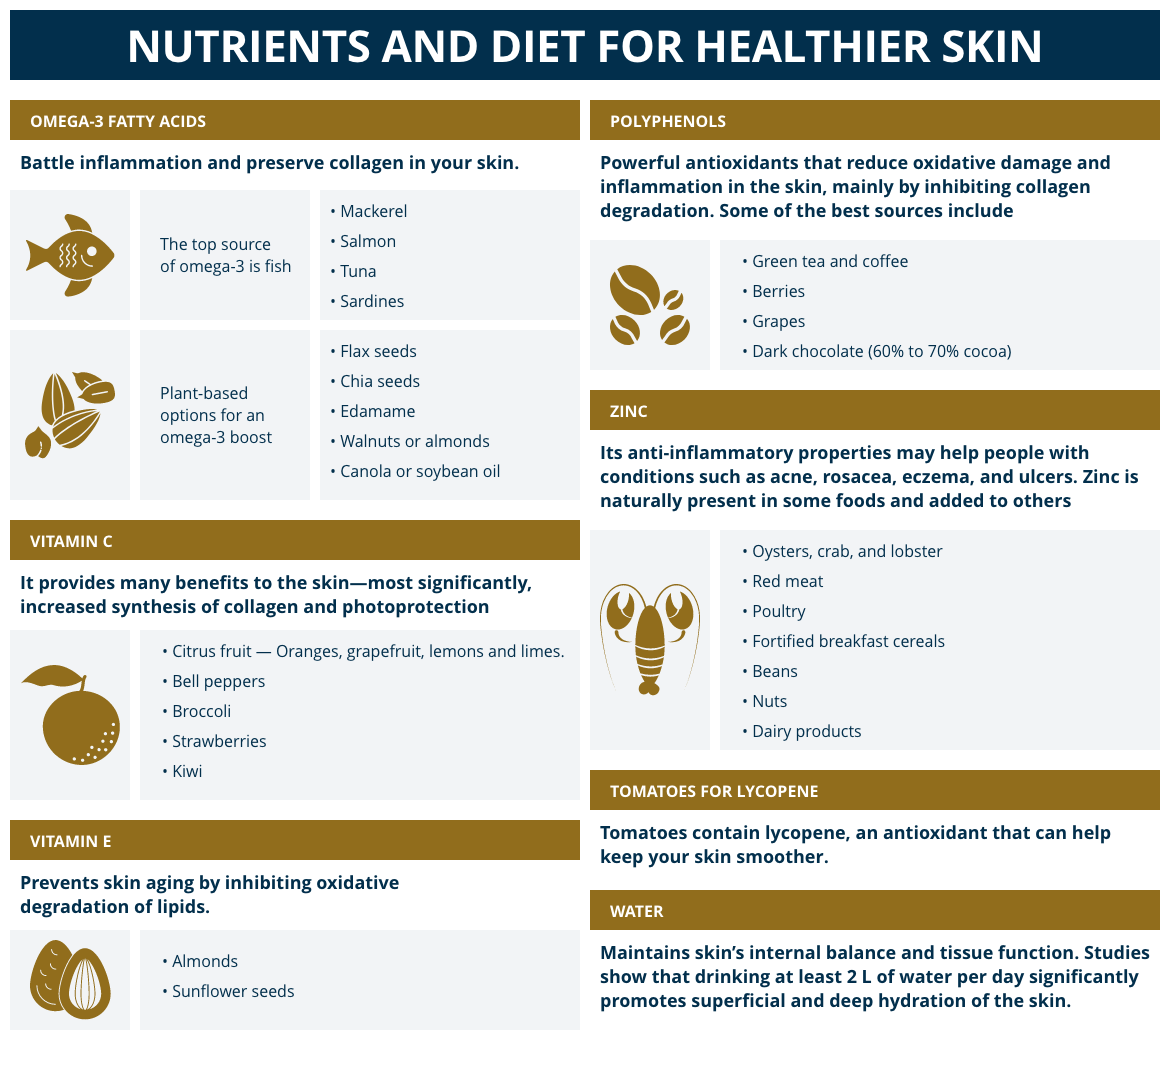 Diets and nutrients to keep or make skin healthy